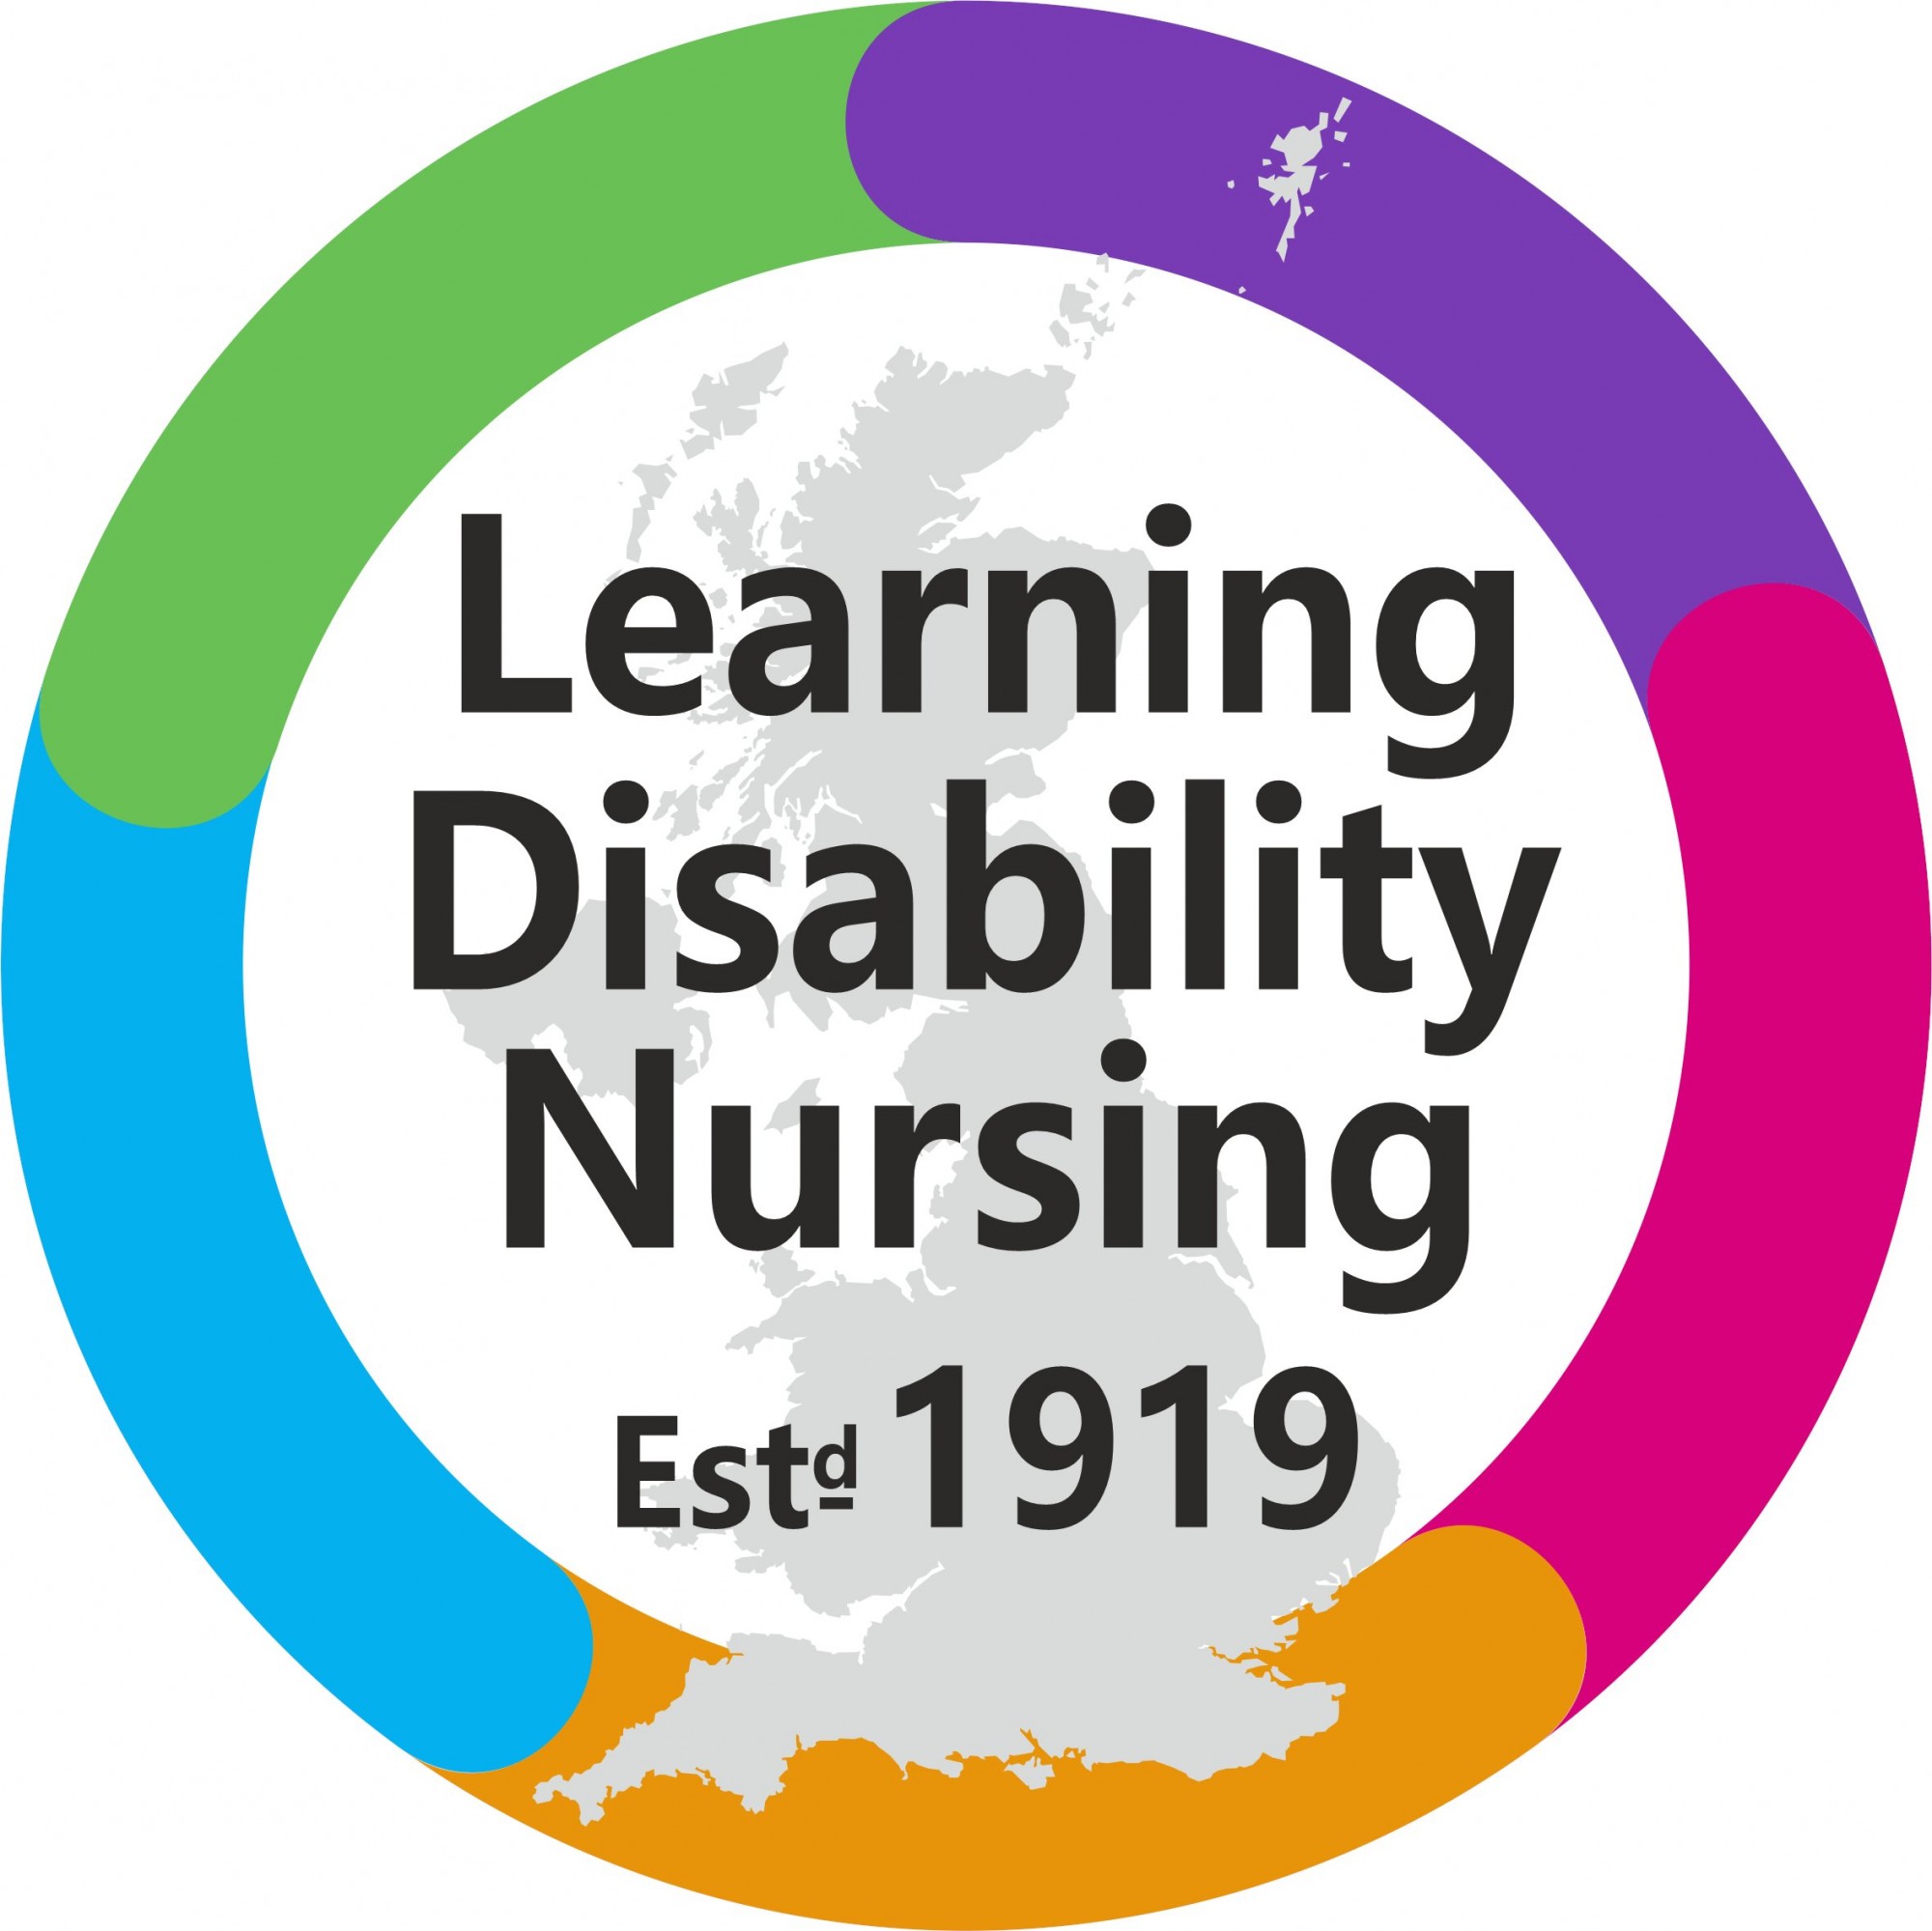 Learning Disability Nursing Est. 1919 coloured graphic.